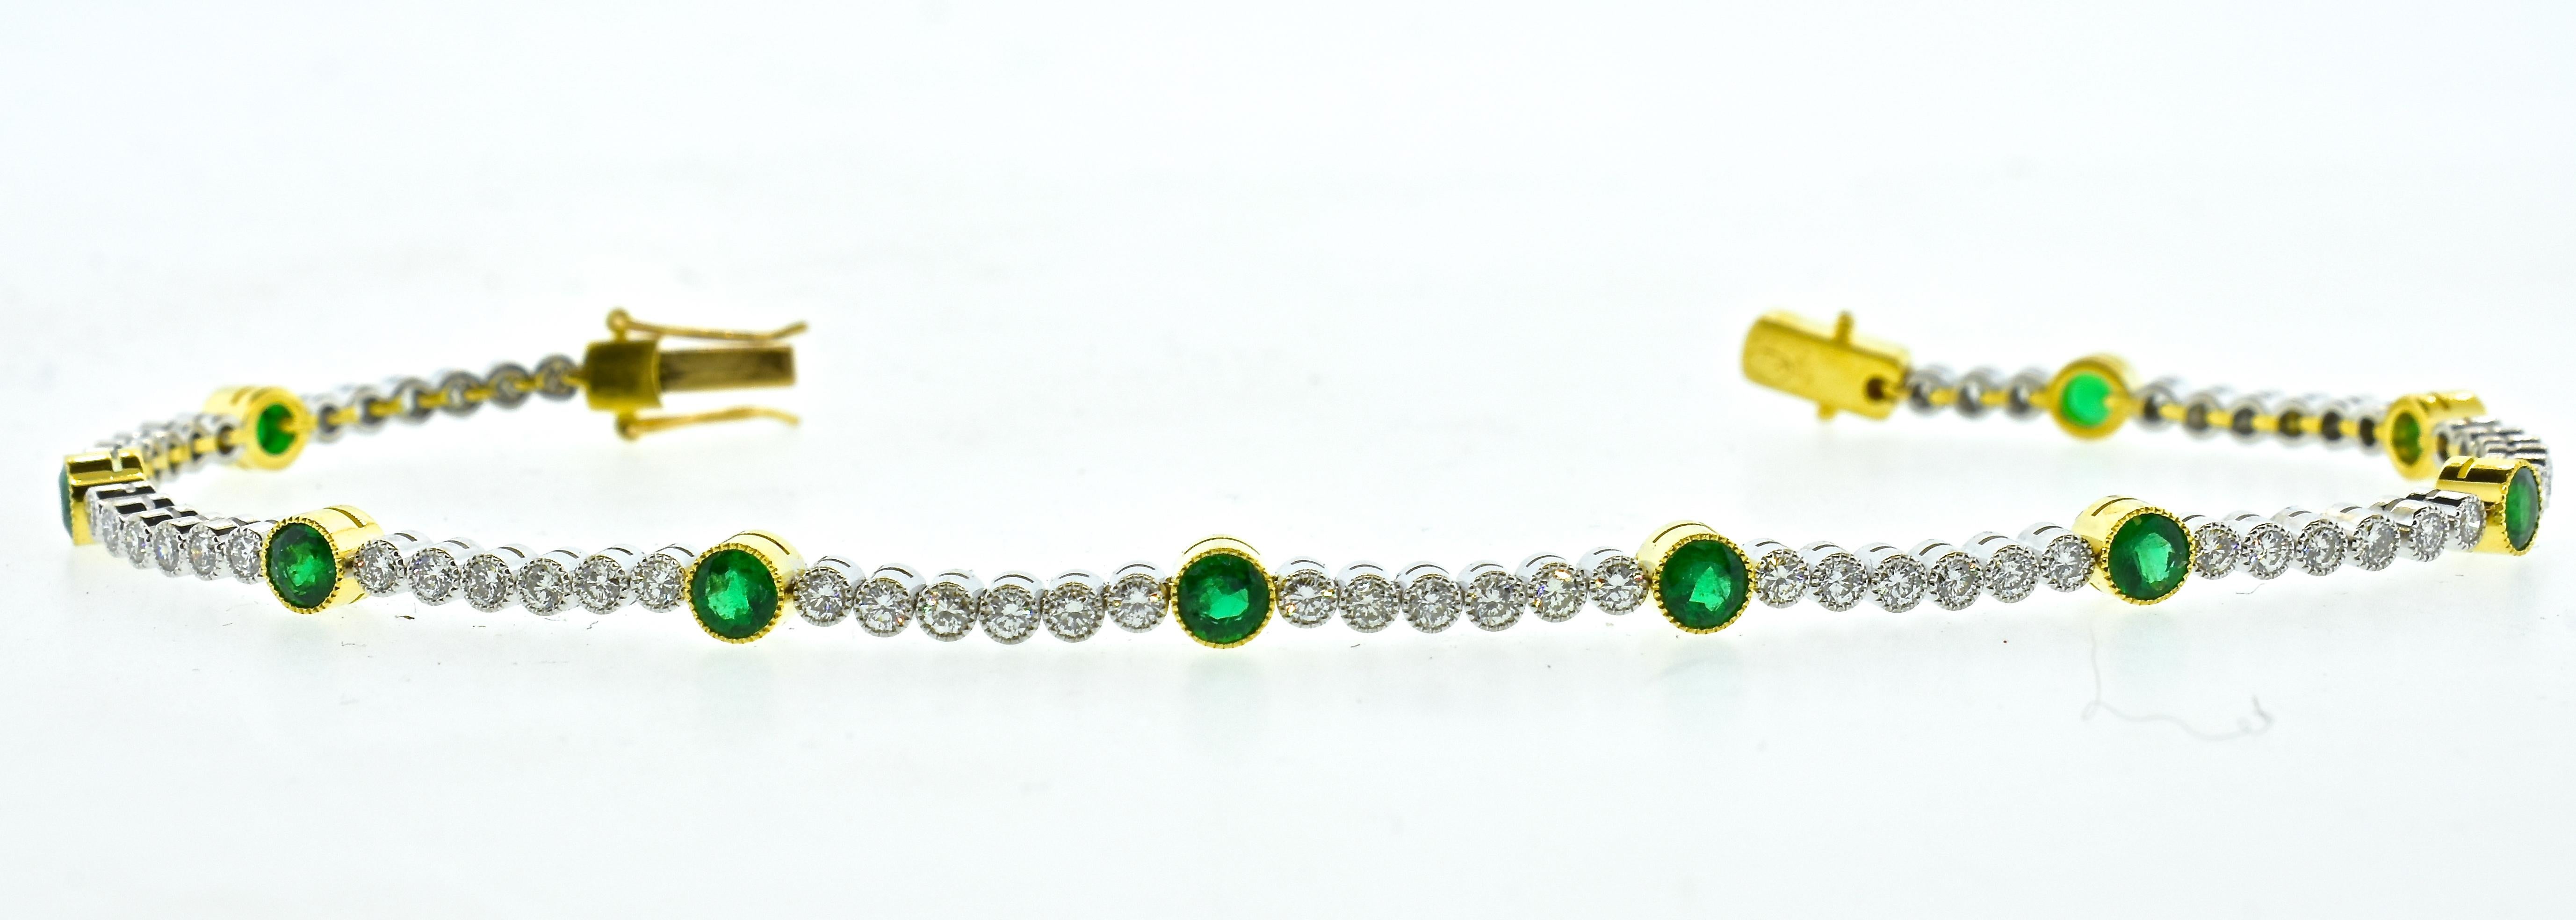 Contemporary 18 Karat, Diamond and Emerald Bracelet by Lucie Campbell, London